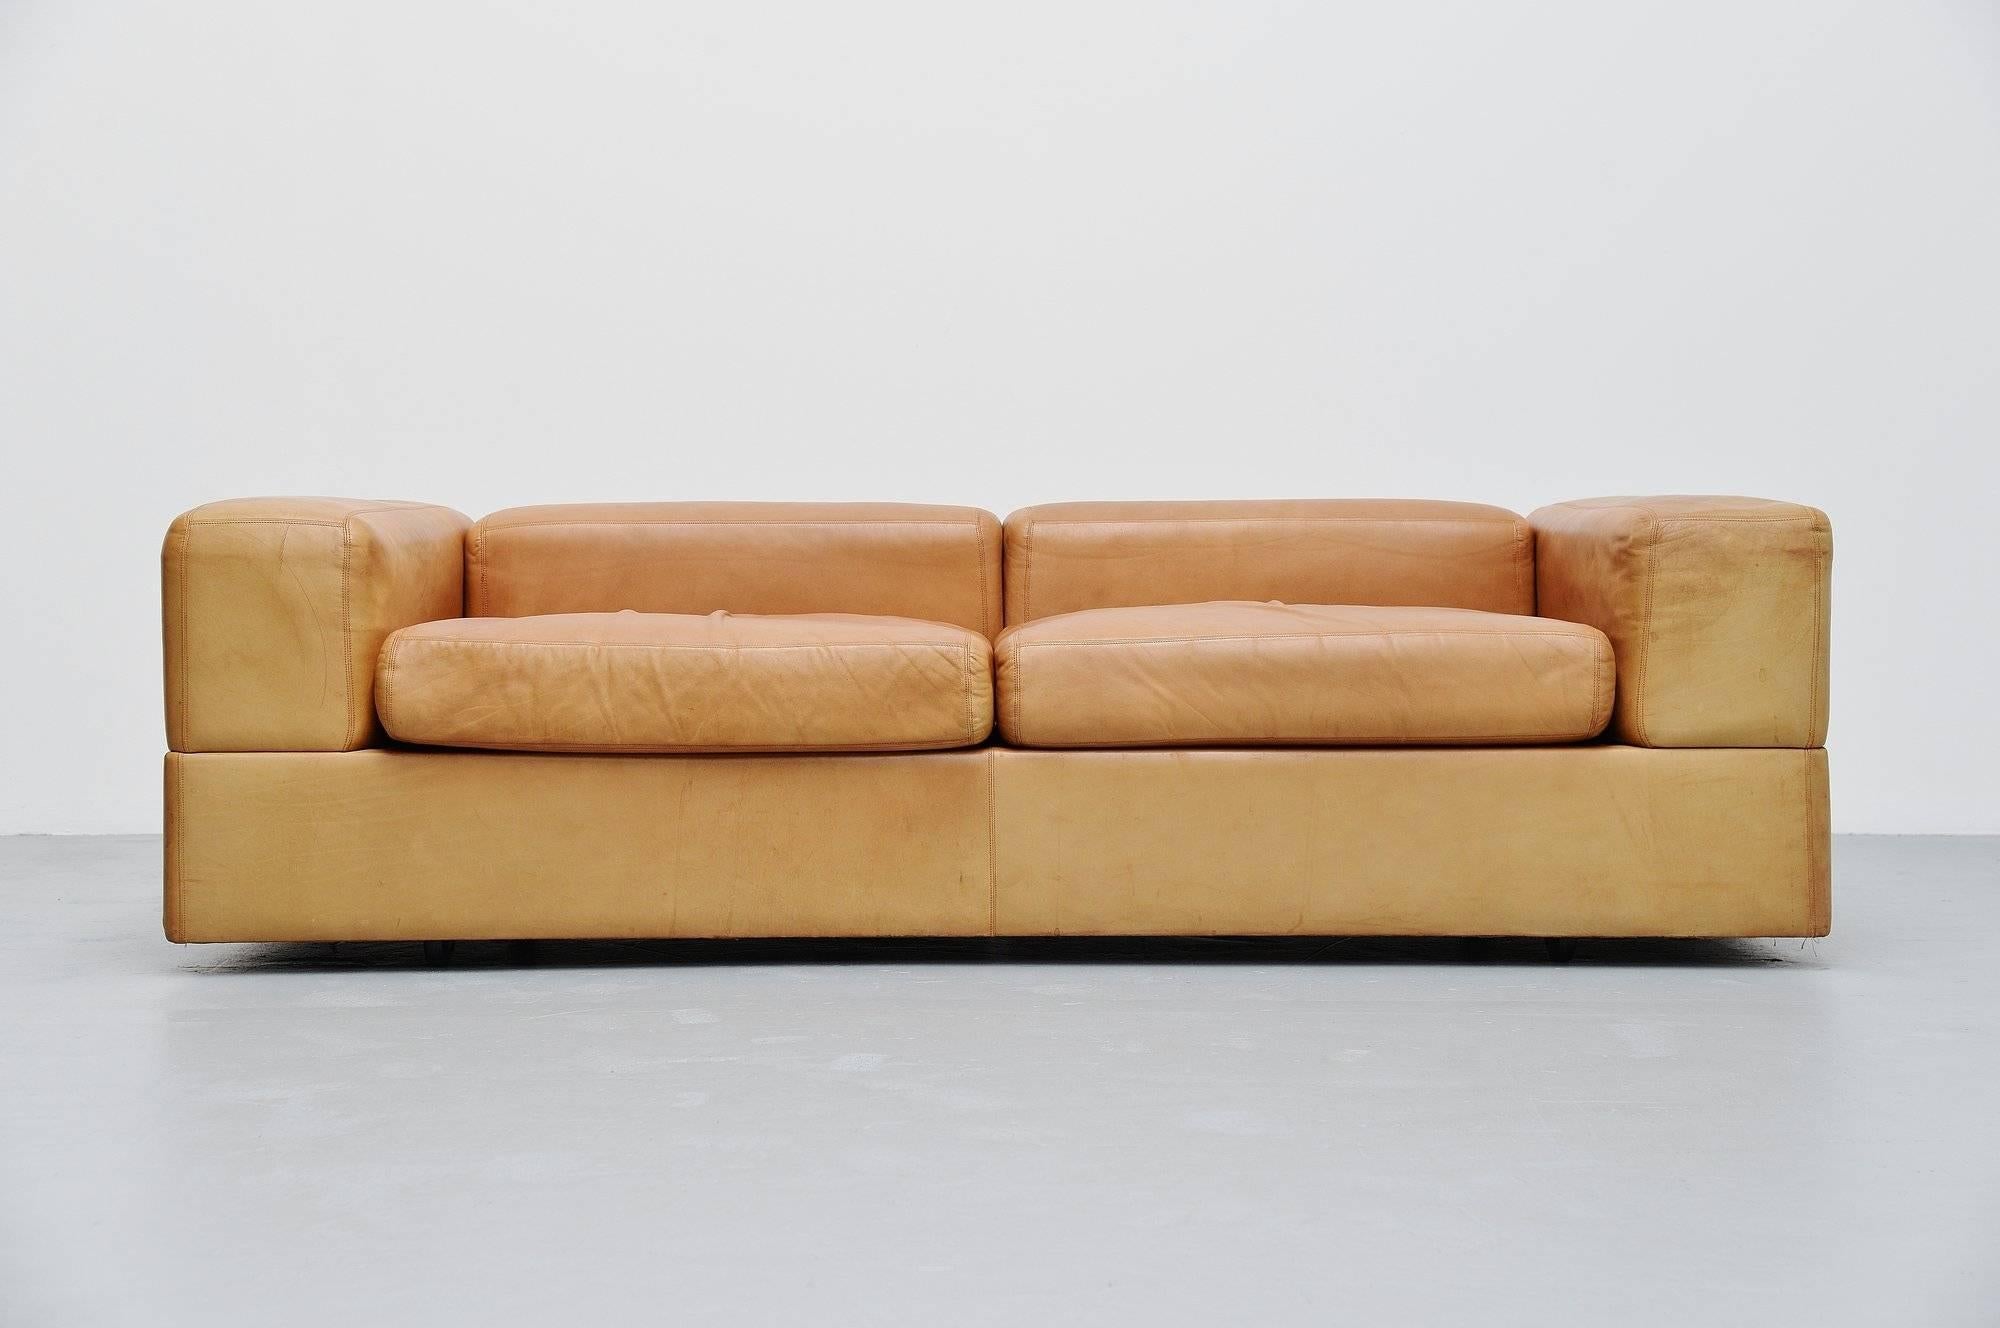 Rare daybed sofa designed by Tito Agnoli and manufactured by Cinova, Italy, 1968. The sofa has a wood structure with metal spring seat. A mattress covered with canvas and the upholstery of the sofa is in natural leather. The sofa has an amazing